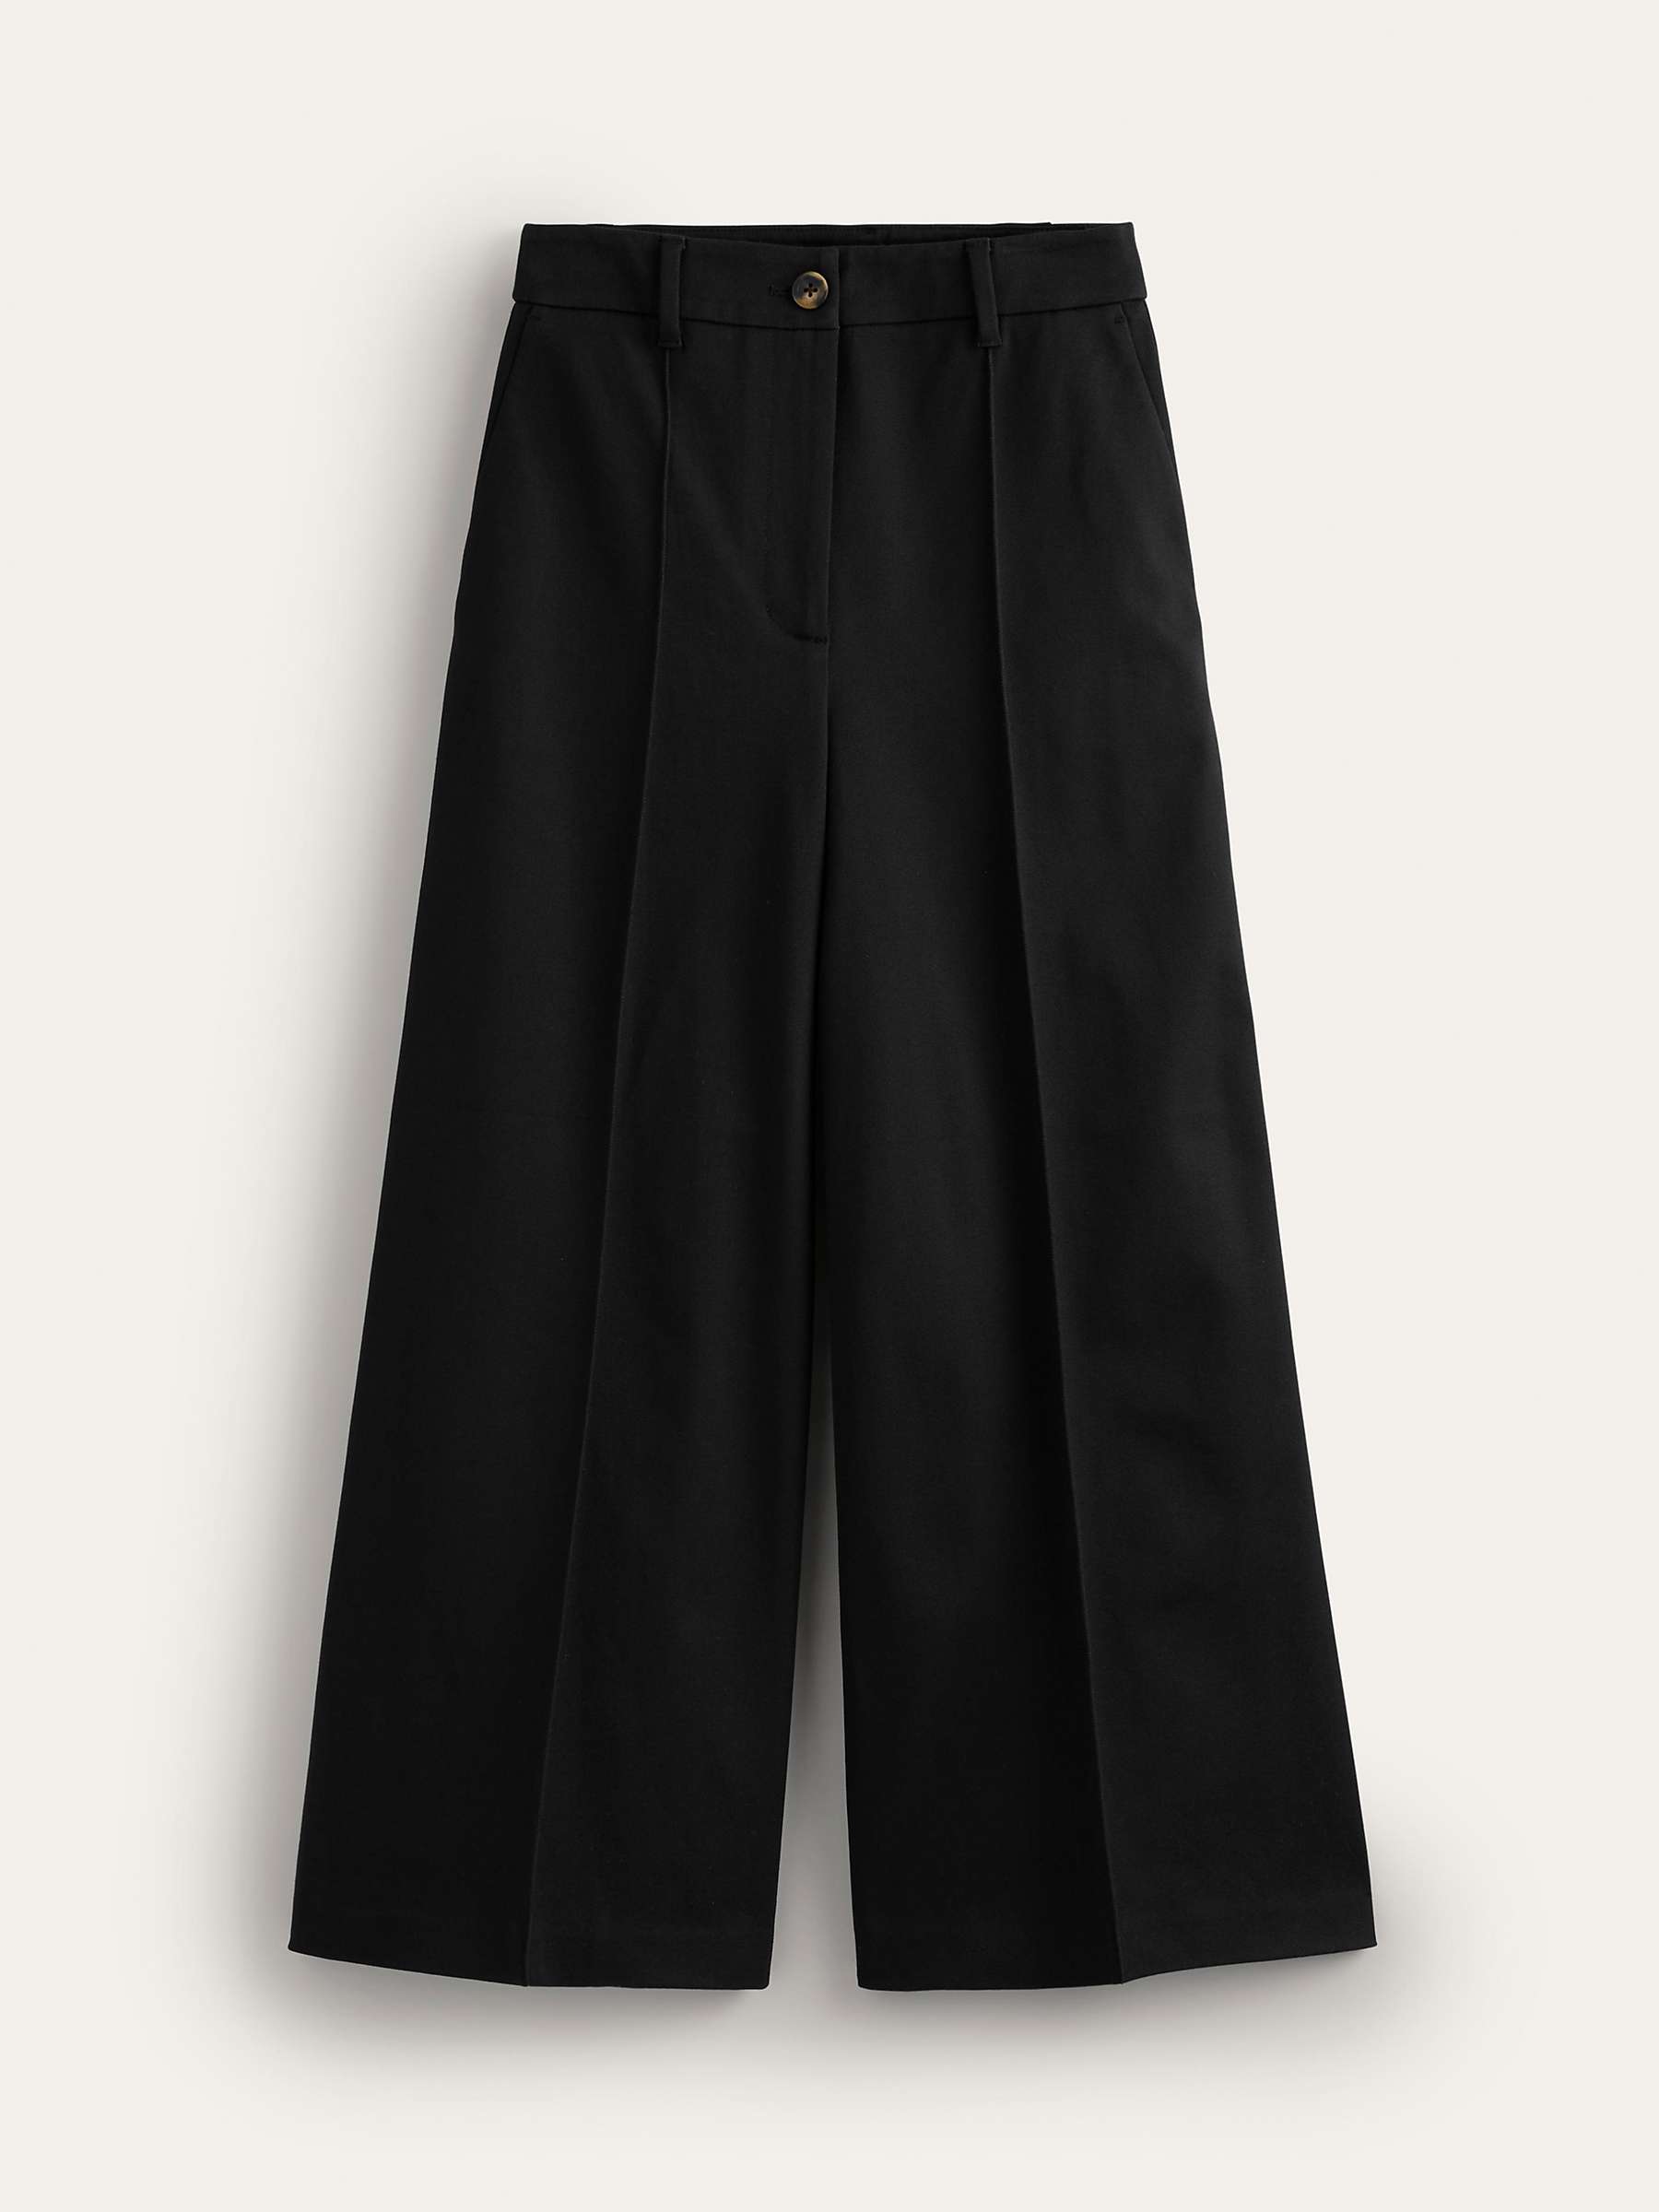 Buy Boden Wide Leg Cropped Trousers, Black Online at johnlewis.com